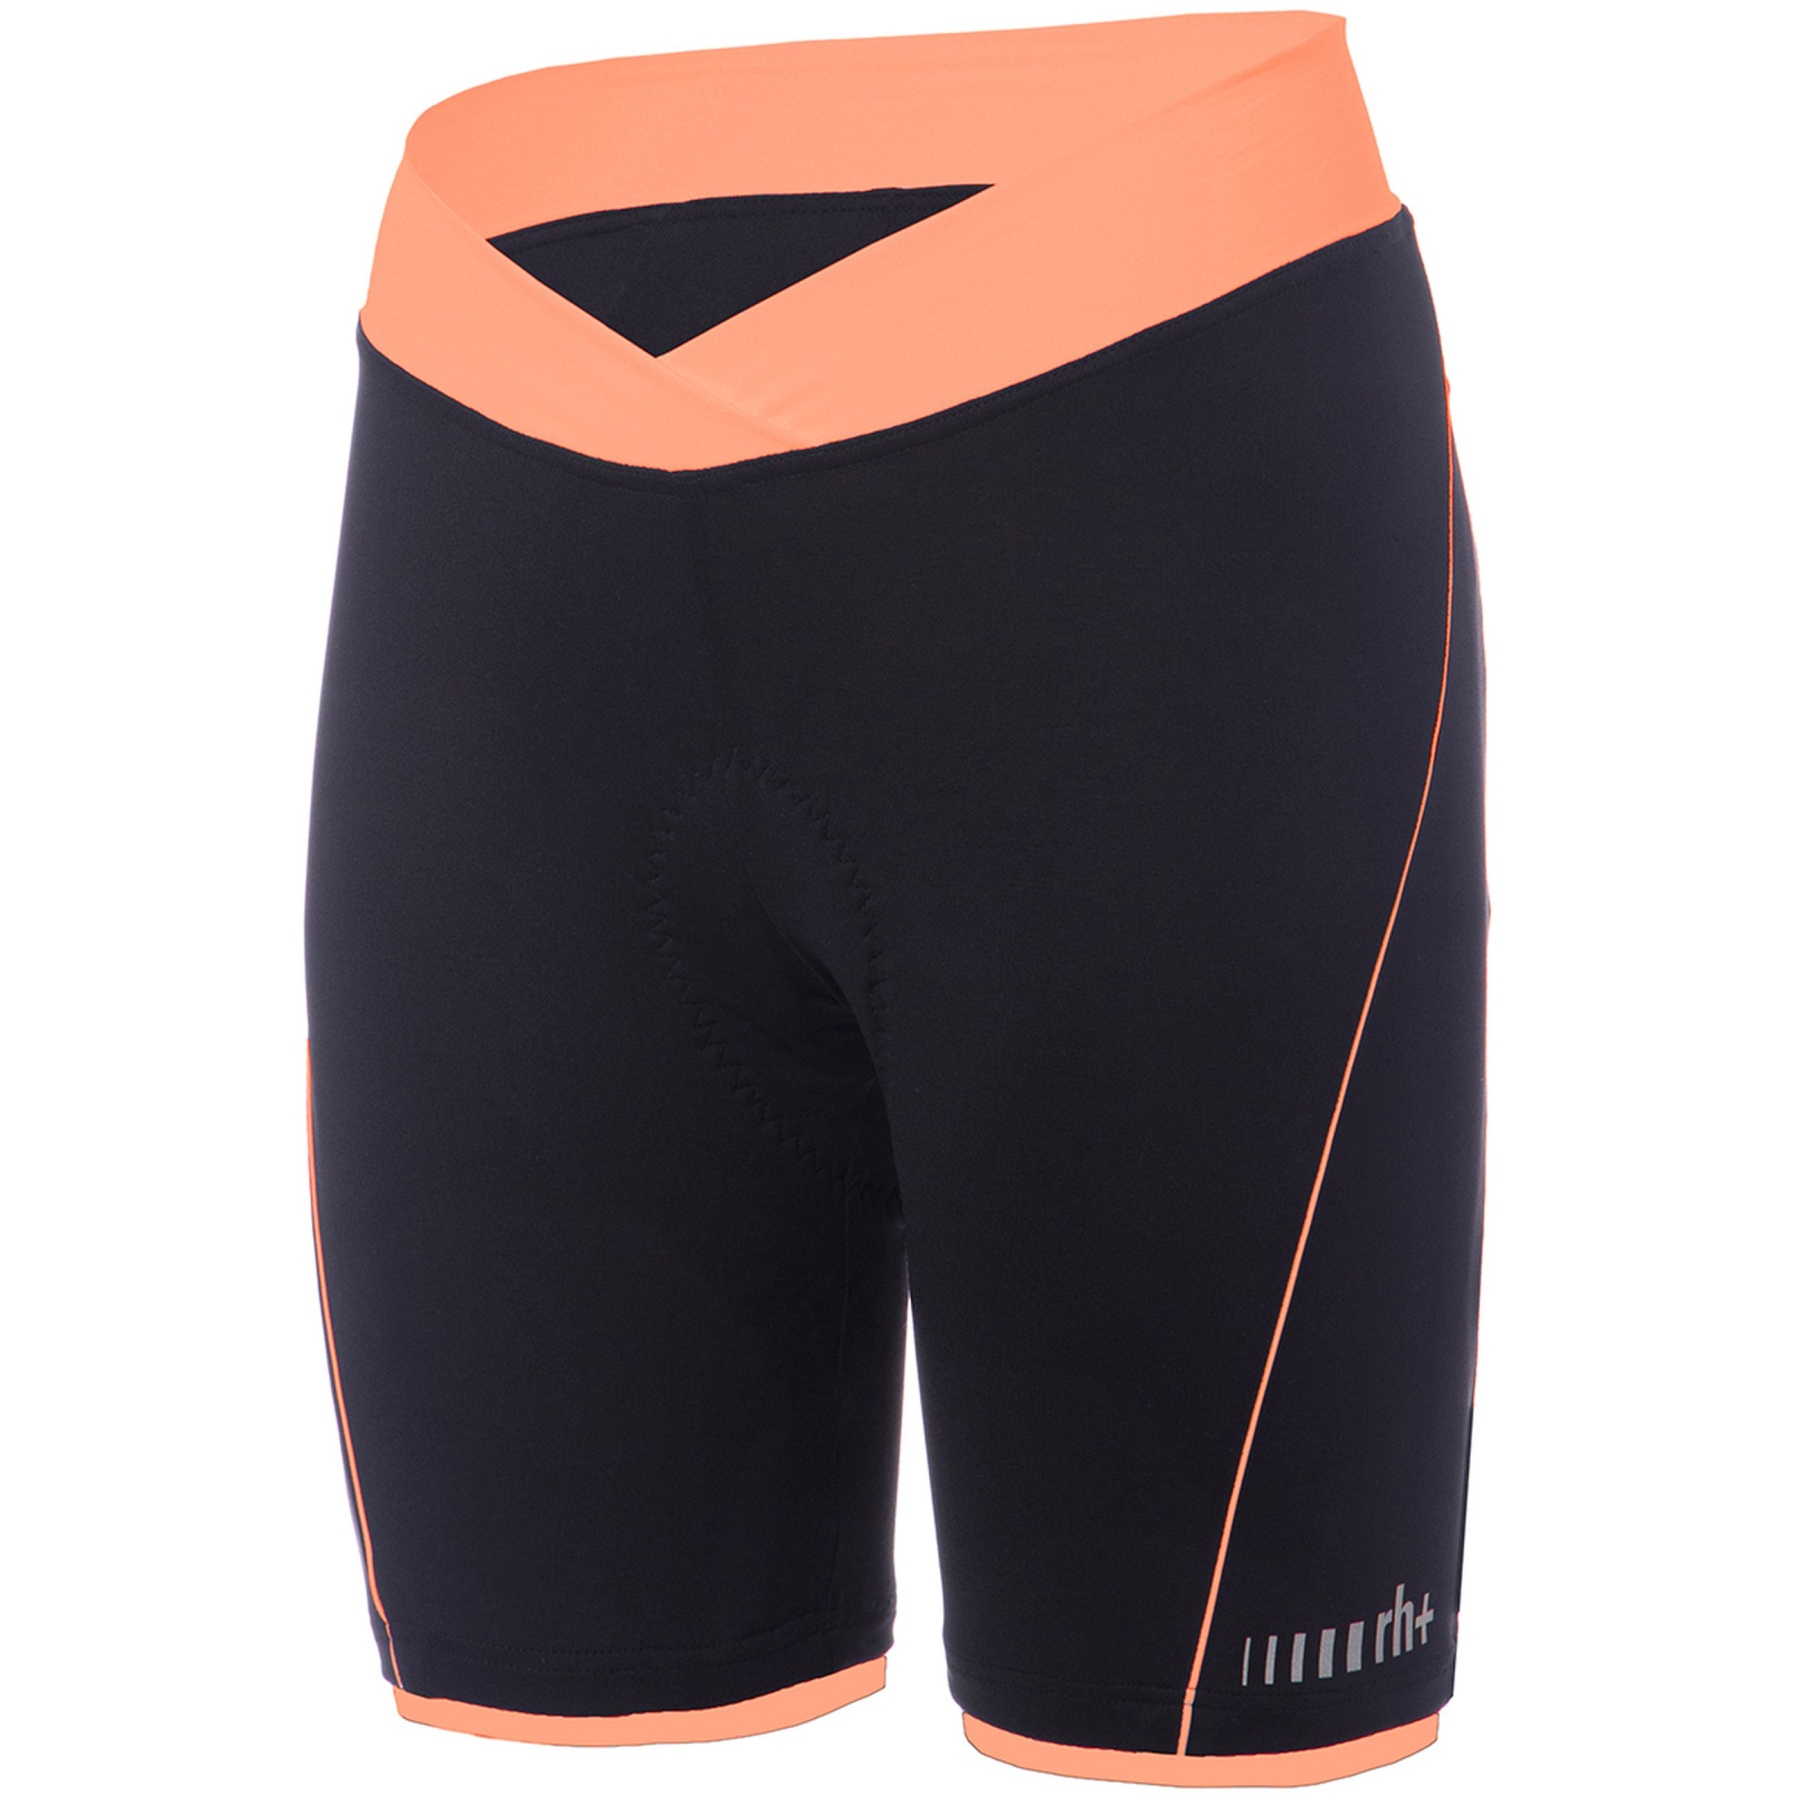 Picture of rh+ Pista Cycling Shorts Women - Black/Apricot